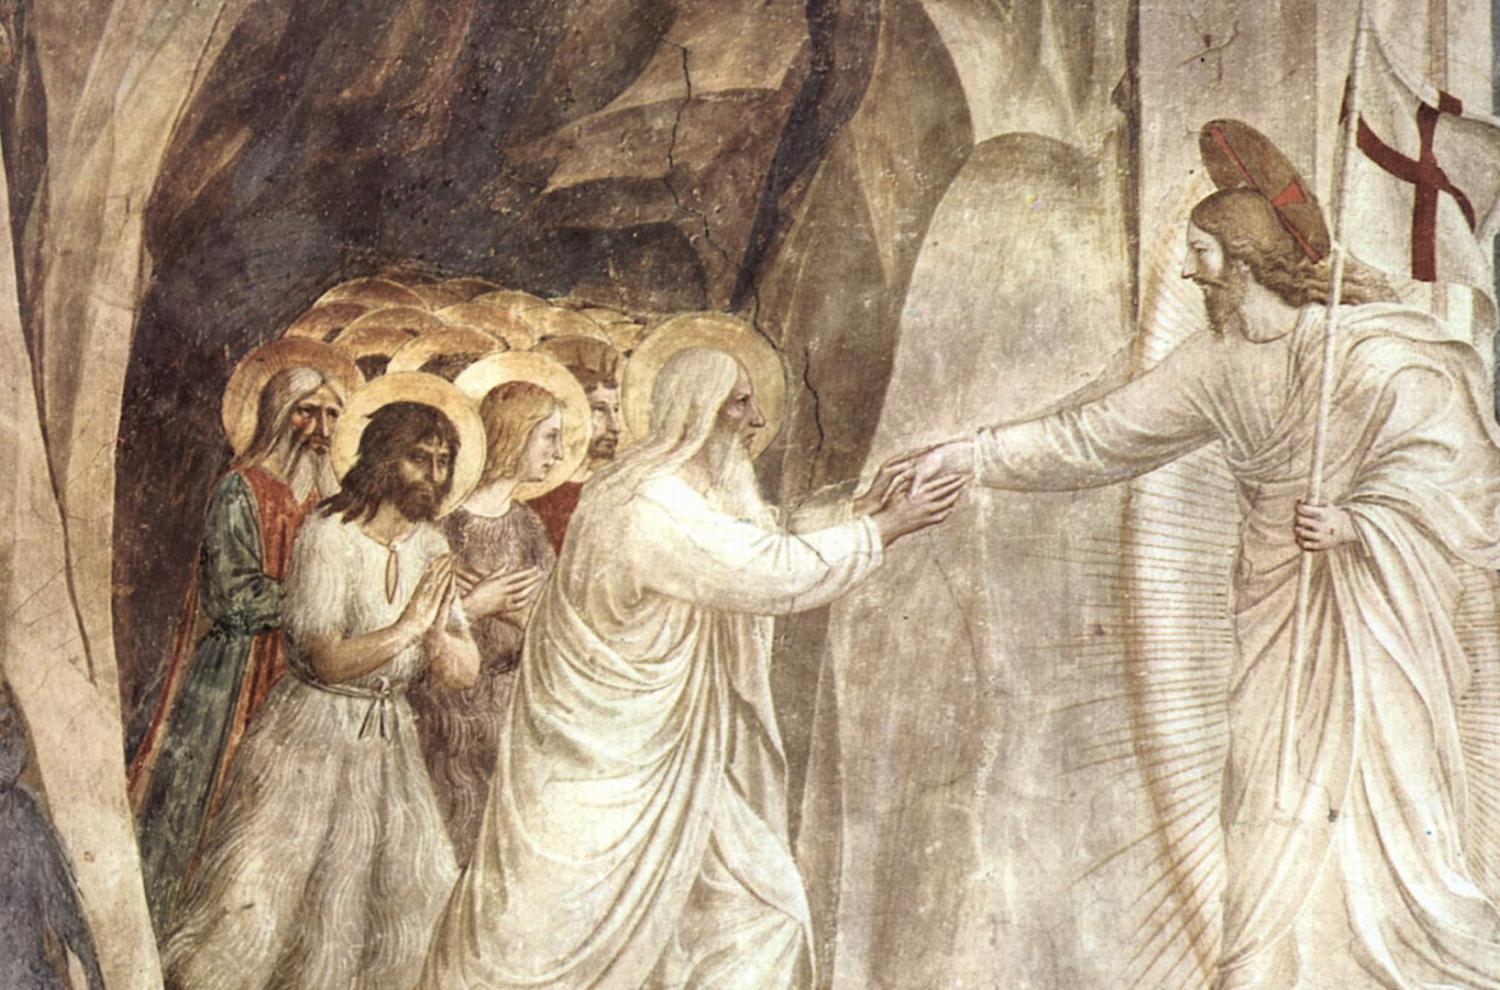 Detail from “Christ in Limbo,” a 15th-century fresco by Fra Angelico.